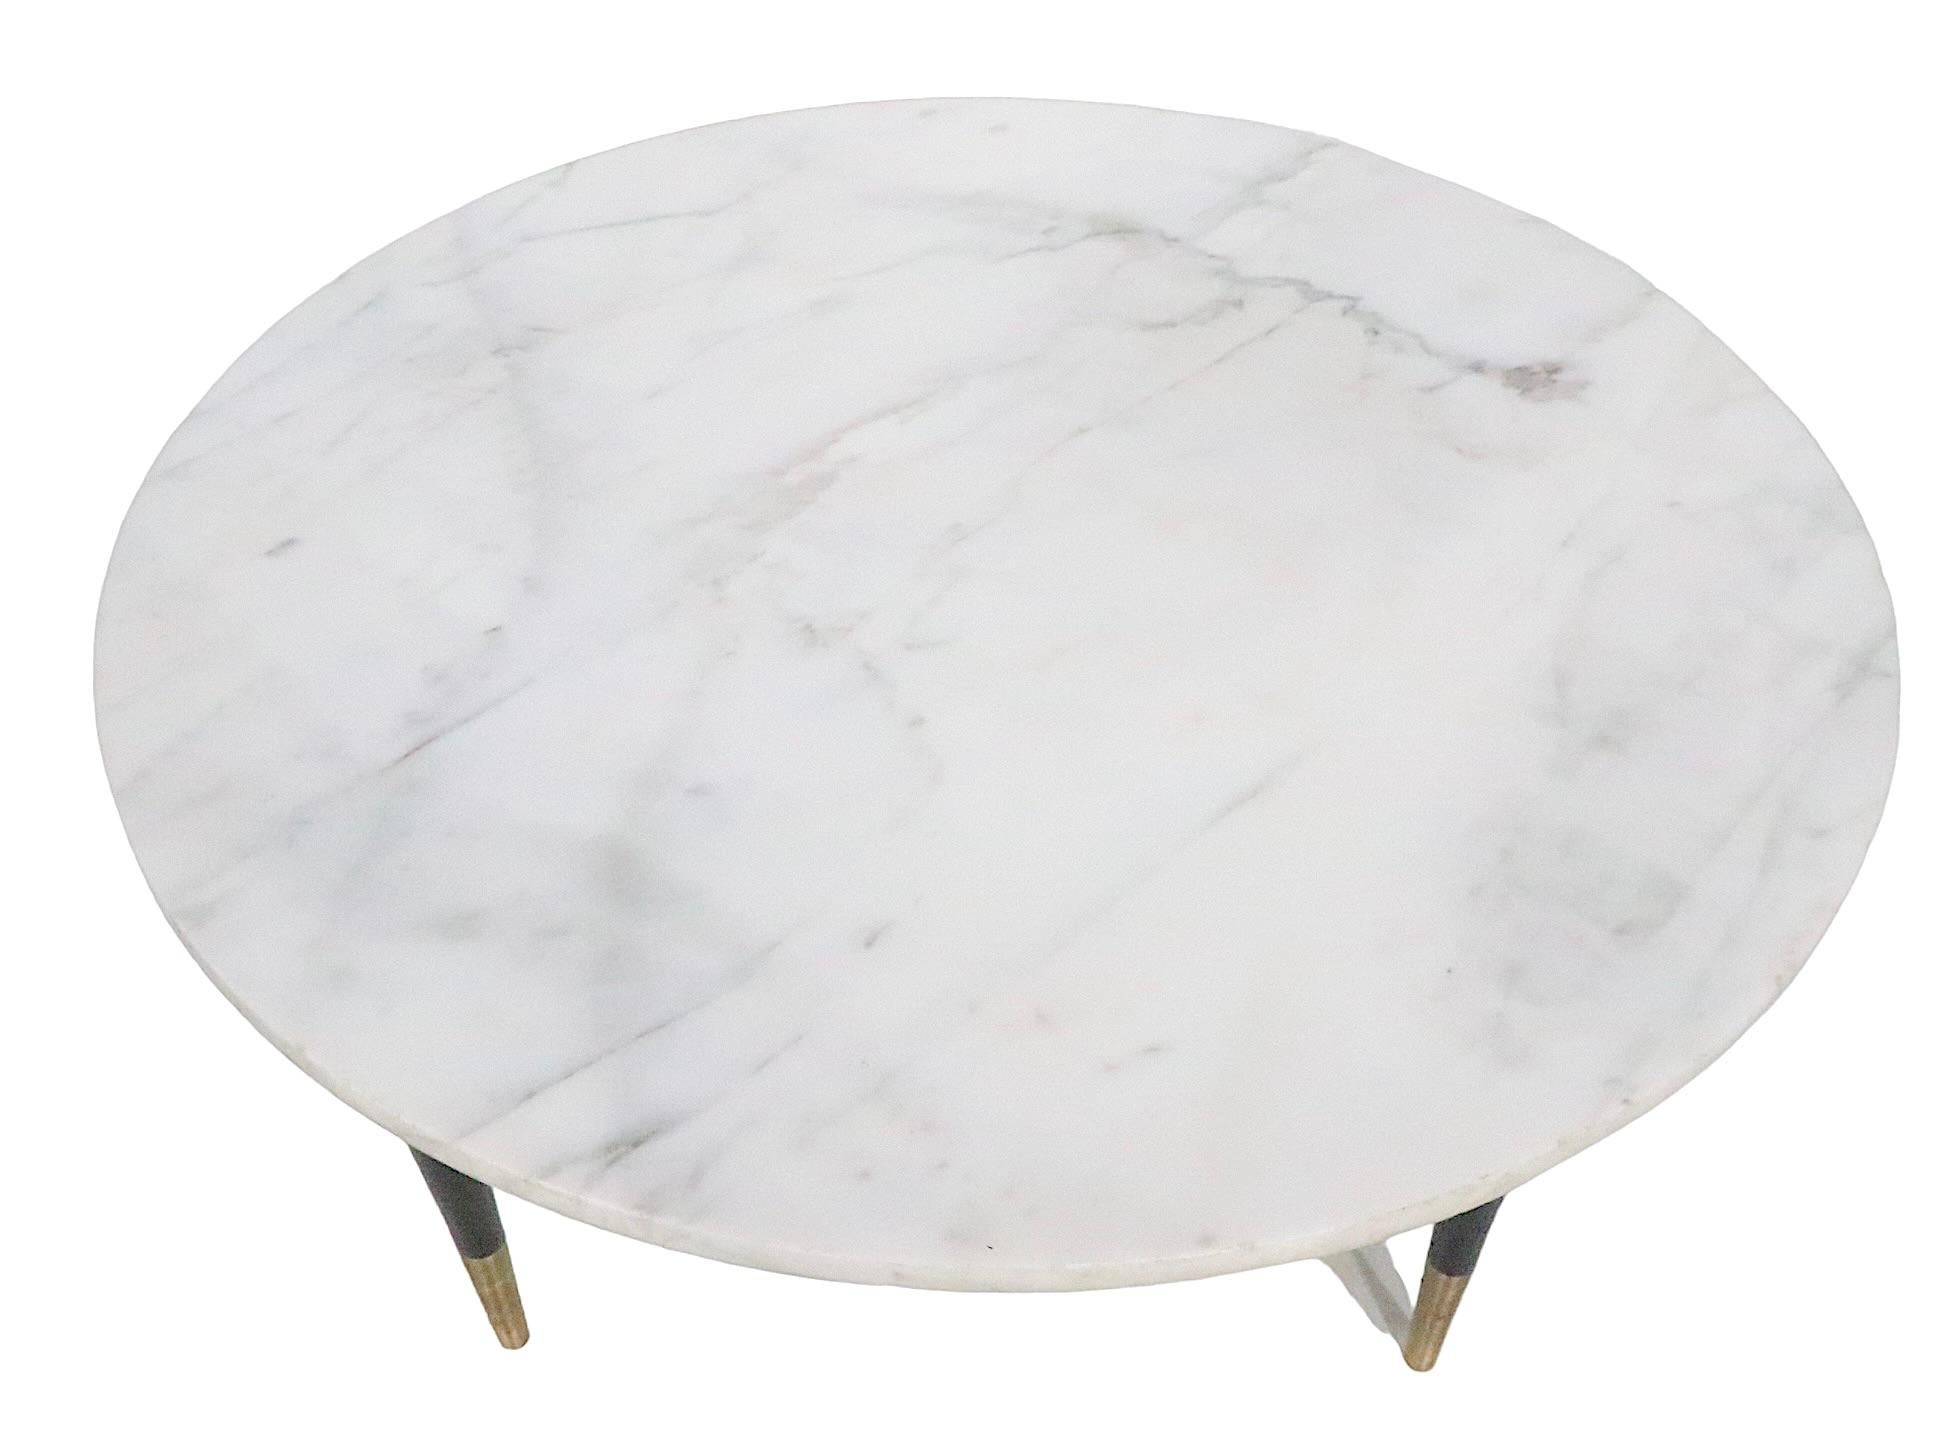 Black and White Mid Century Marble Top Coffee Cocktail Table, circa 1950/1960s For Sale 5